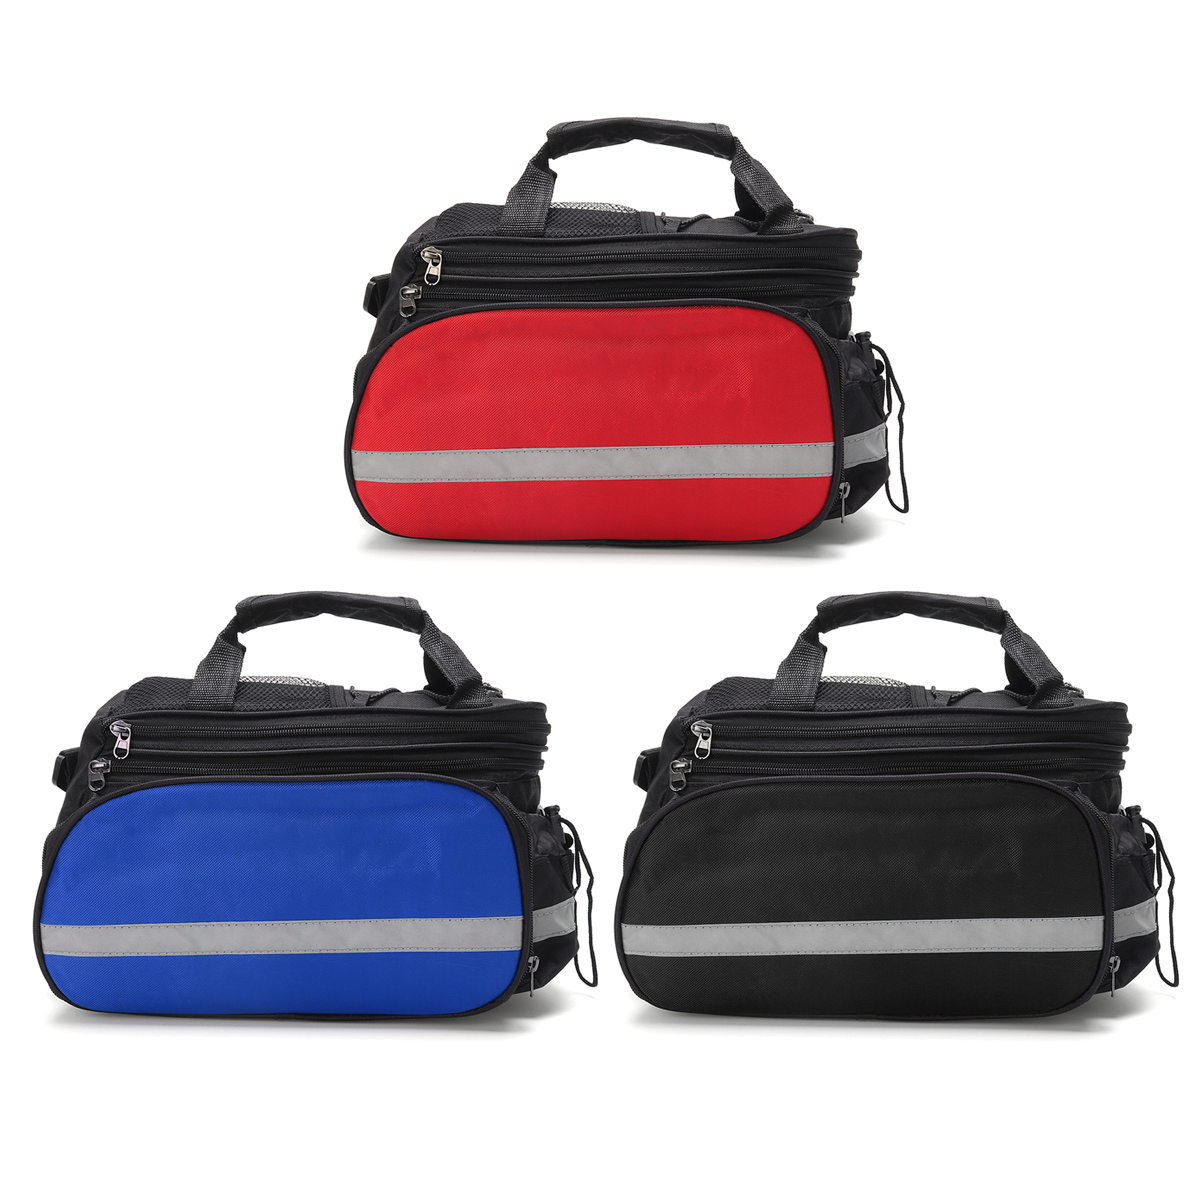 27L-Bicycle-Riding-Package-Large-Capacity-Waterproof-Reflective-Strips-Outdoor-Riding-Bag-1874551-16